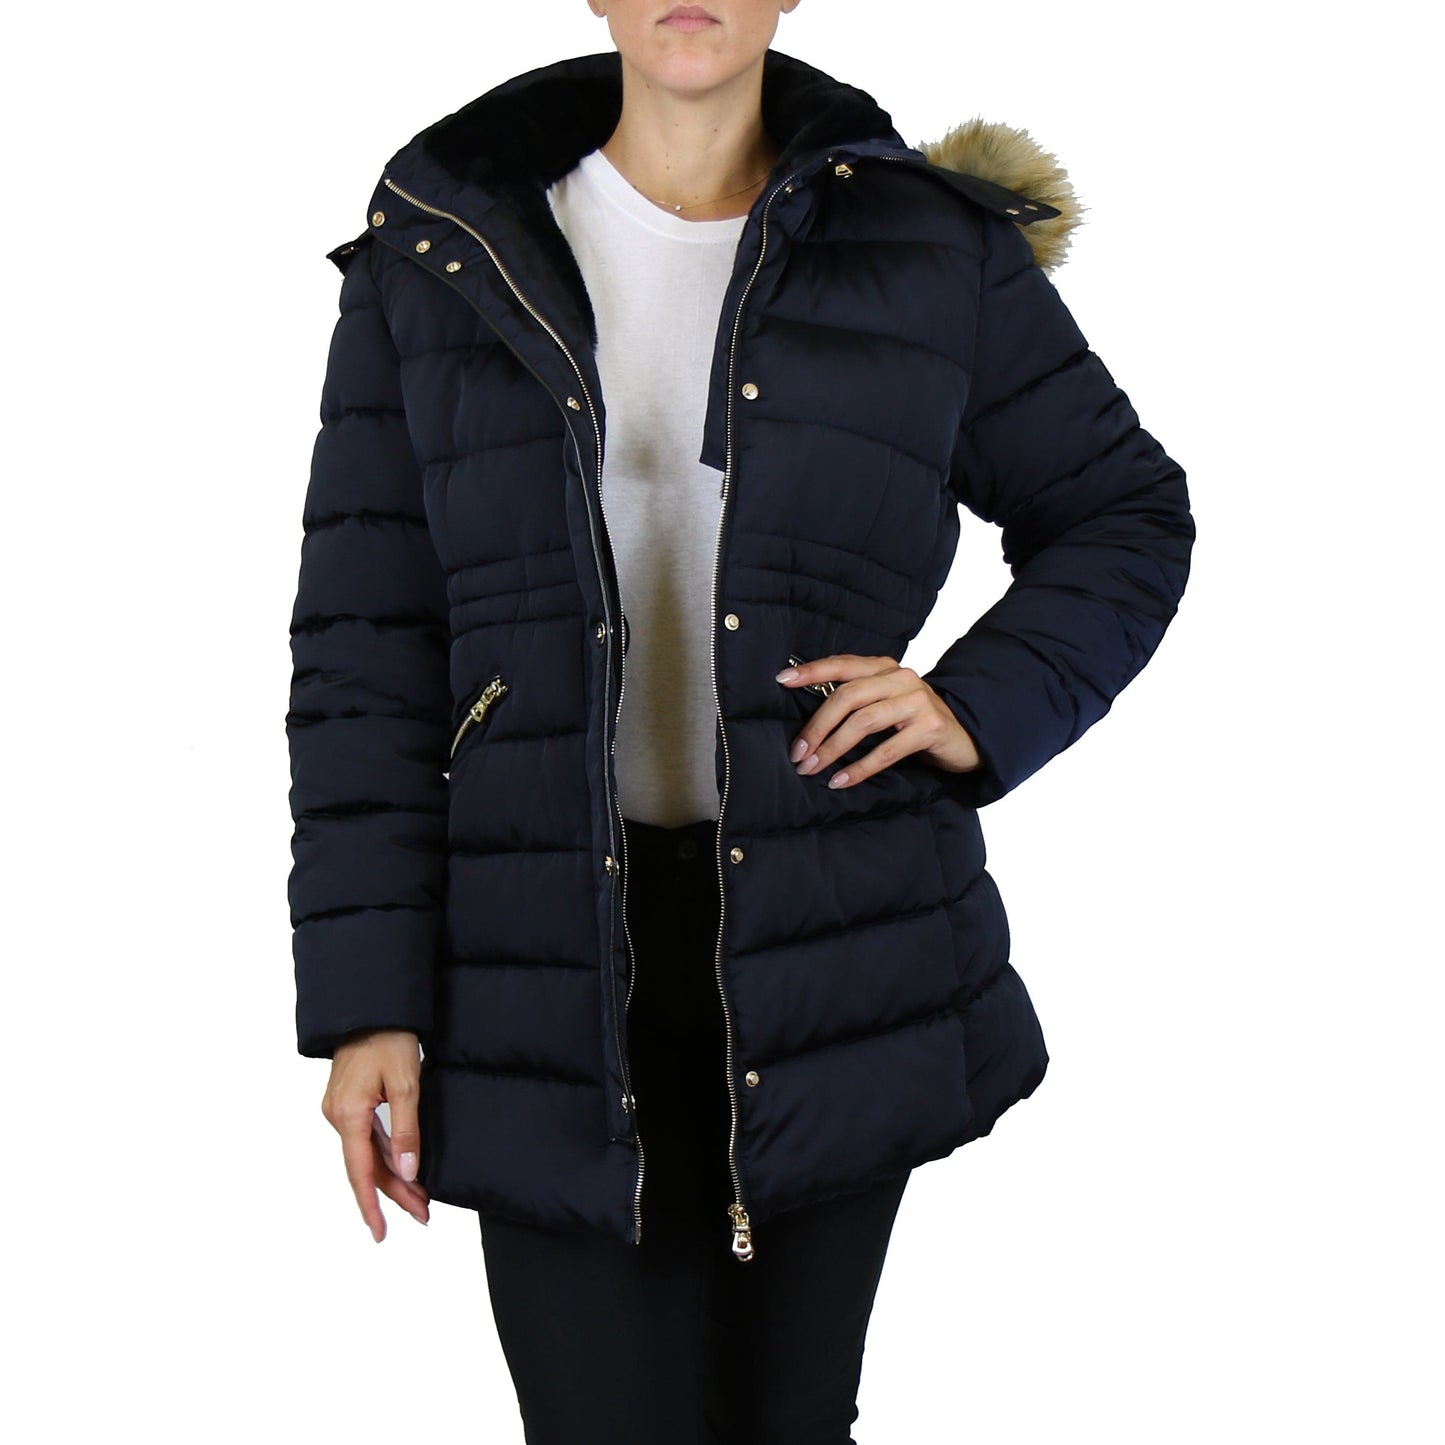 Women's Heavyweight Parka Jacket with Detachable Faux Fur Hood - GalaxybyHarvic